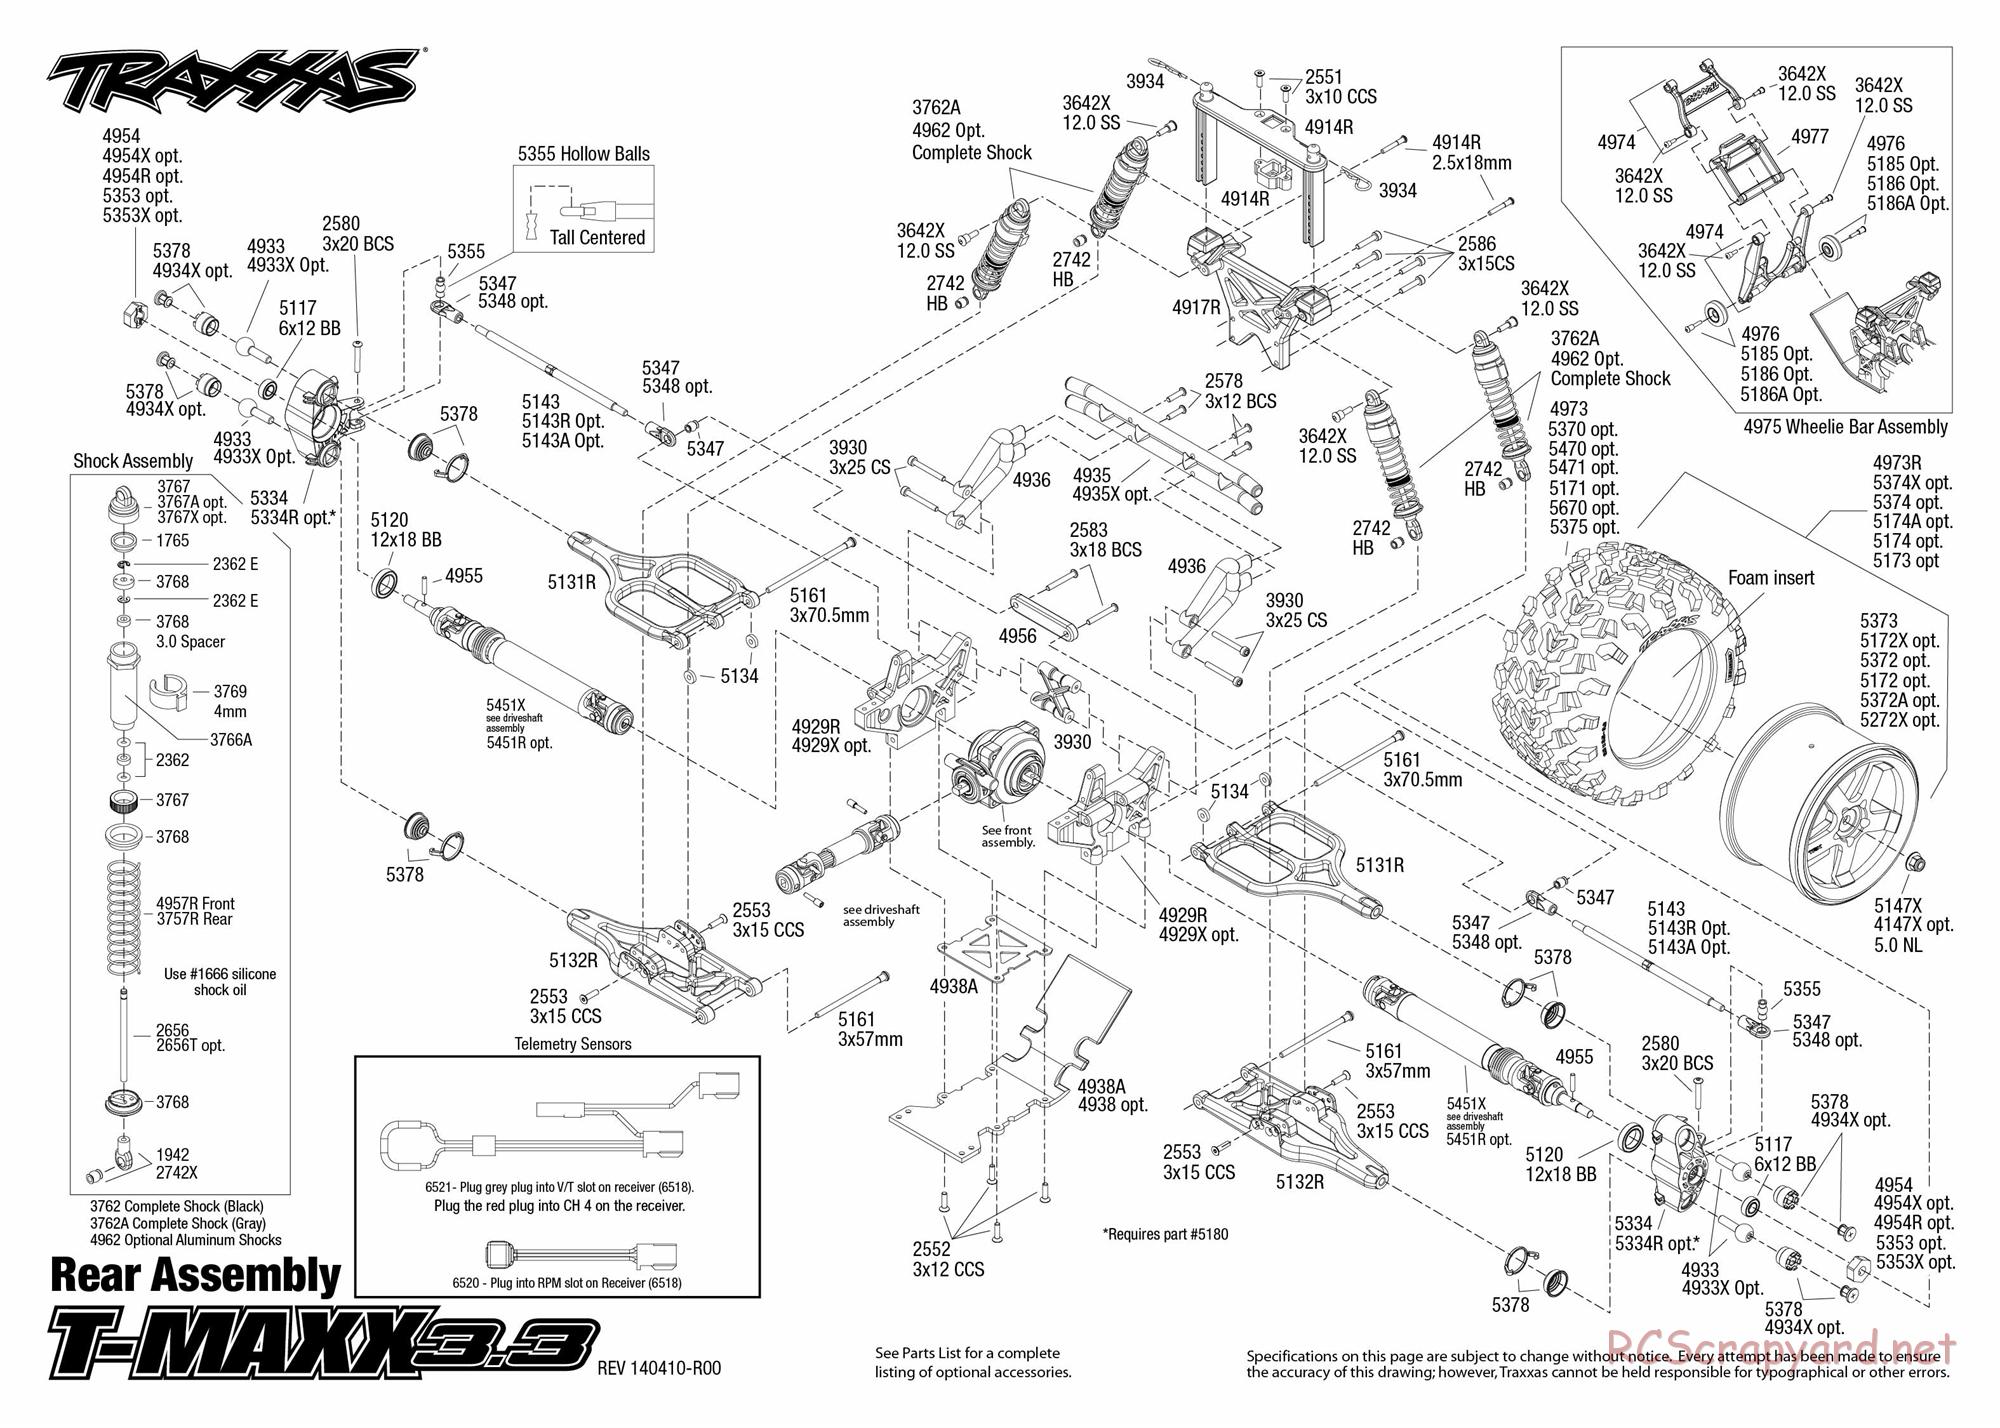 Traxxas - T-Maxx 3.3 (2014) - Exploded Views - Page 4